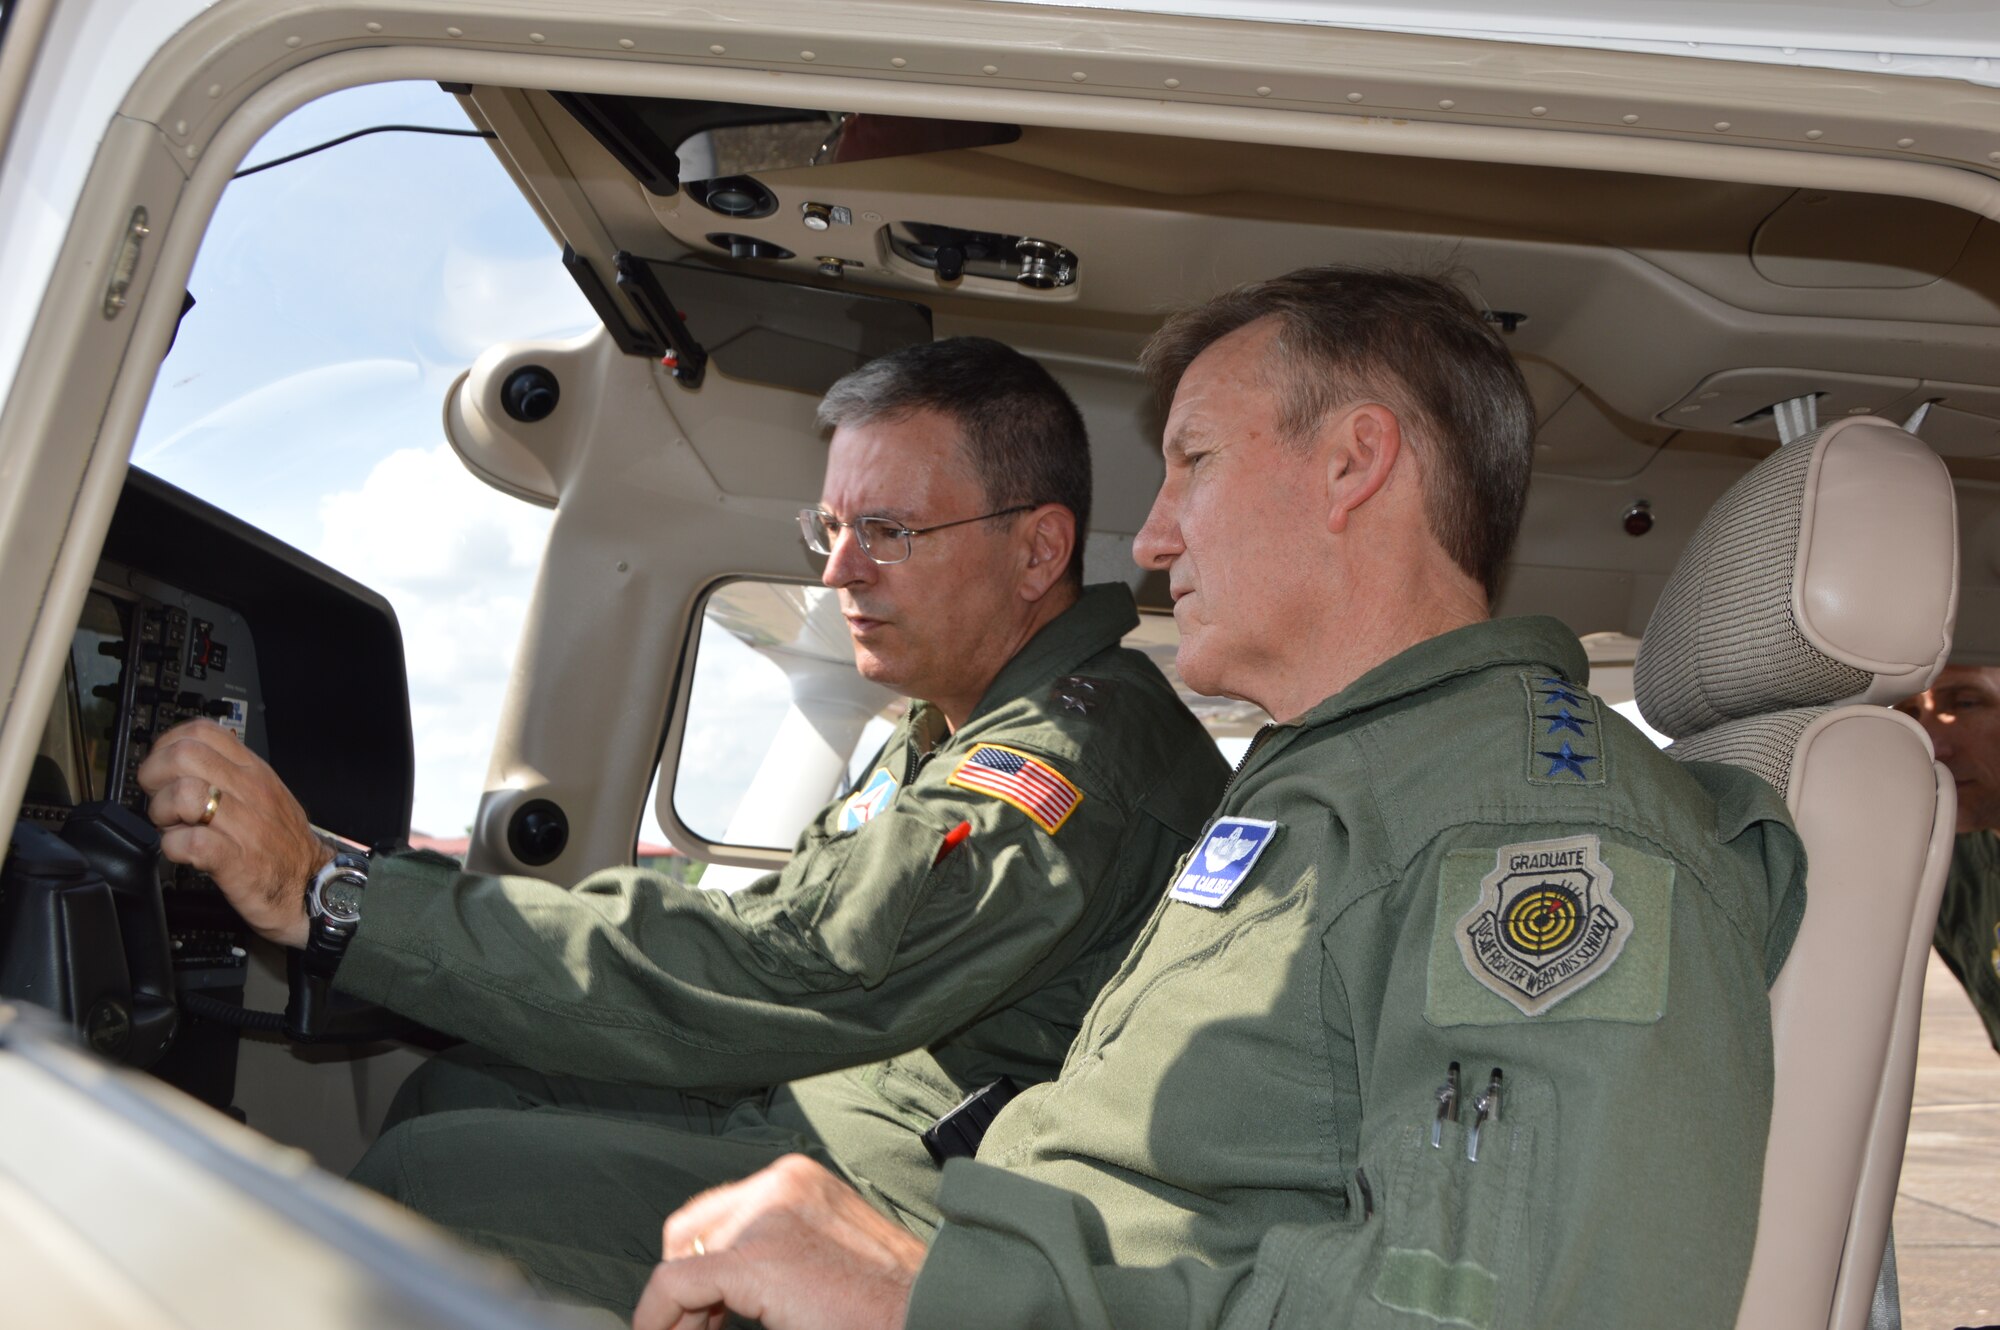 (Left) Maj. Gen. Joseph Vazquez, National Commander of Civil Air Patrol, explains a point about the instruments of a Civil Air Patrol aircraft to Gen. Hawk Carlisle, commander of Air Combat Command, during Carlisle’s visit to CAP National Headquarters at Maxwell Air Force Base, Ala., June 18. Carlisle also met with CAP senior leadership as part of a mission-familiarization visit. (Air Force Photo Released/Mary McHale)